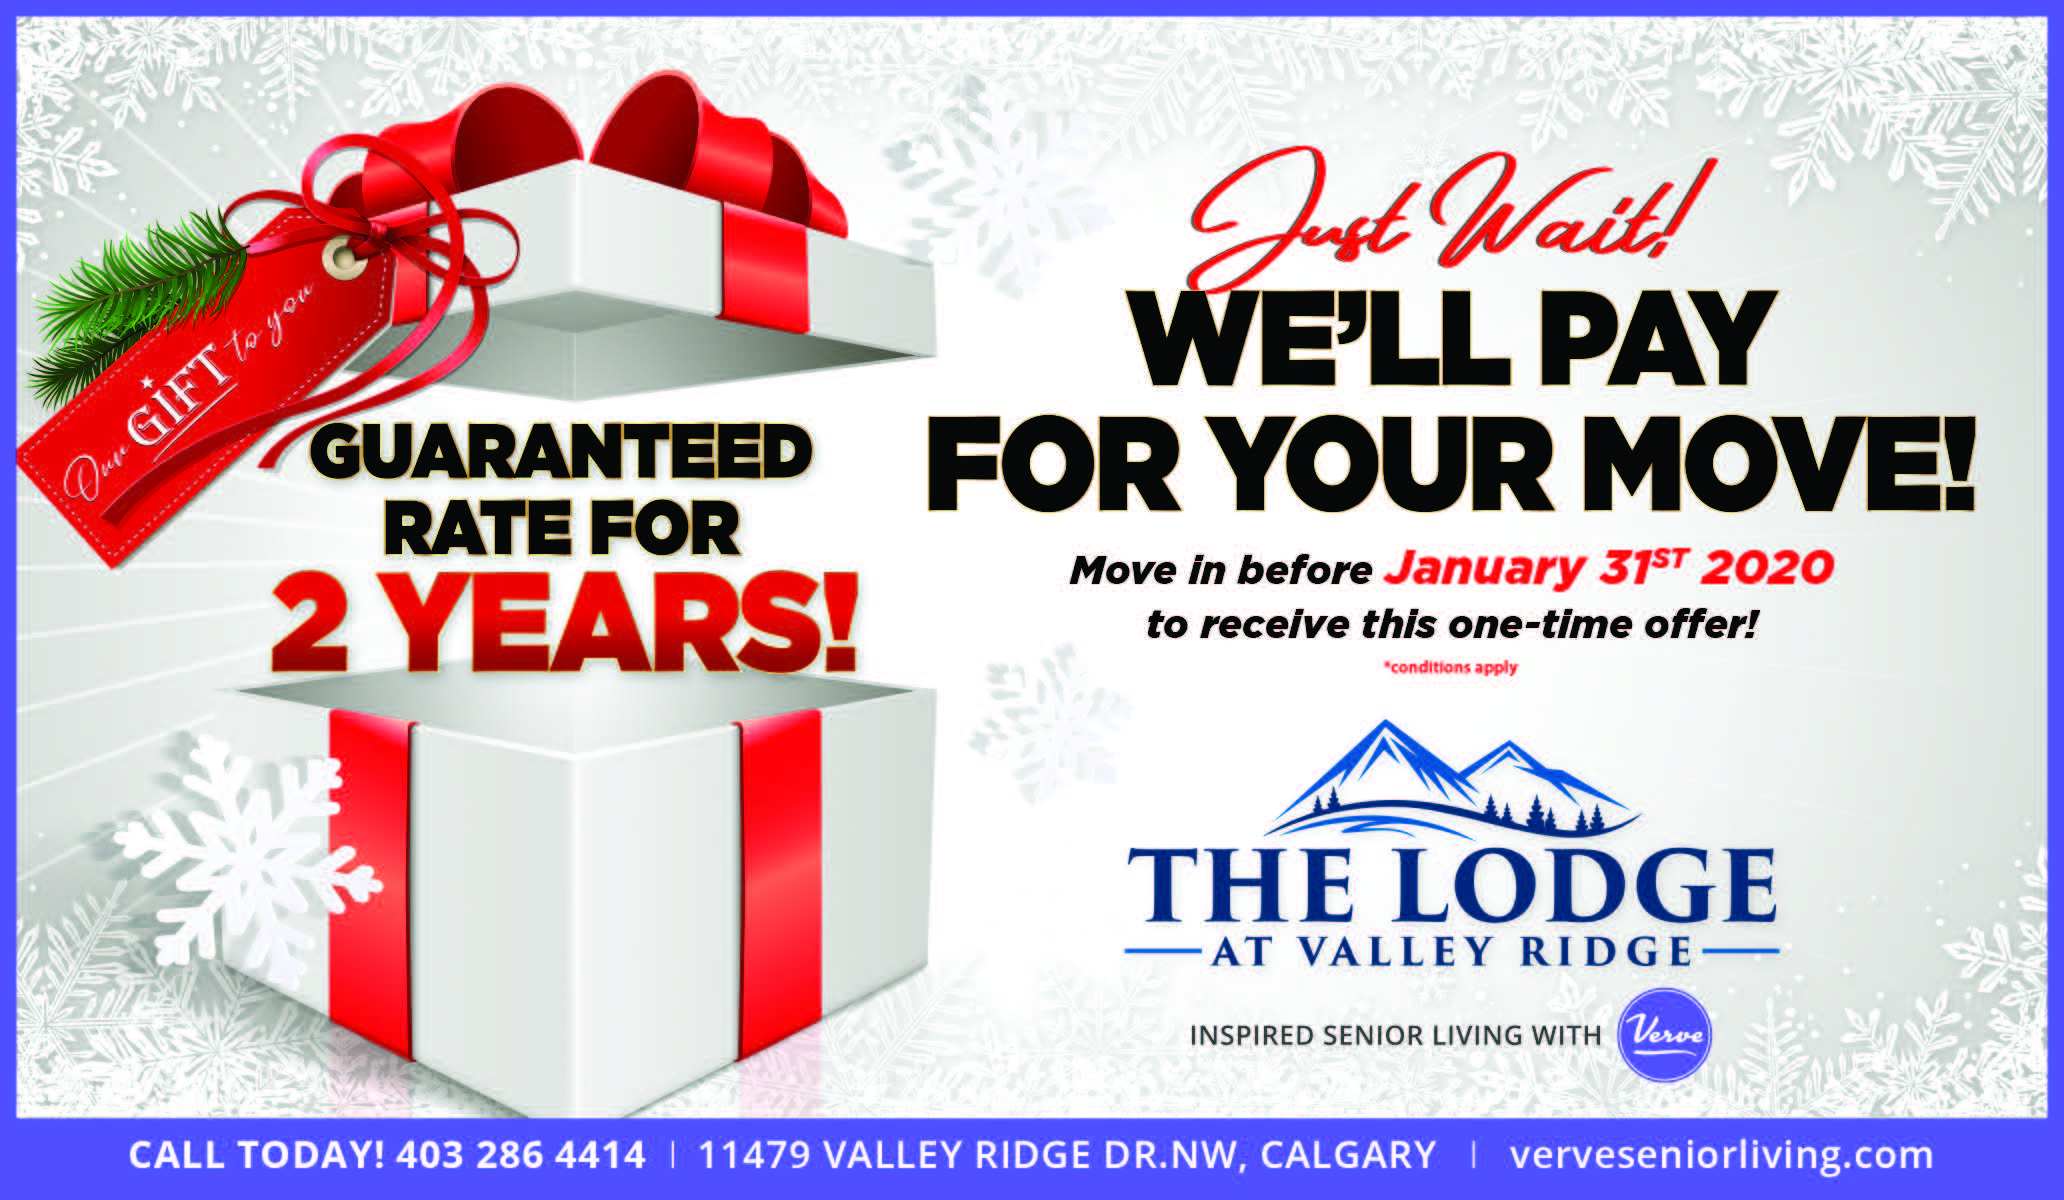 The Lodge at Valley Ridge Our Gift To You